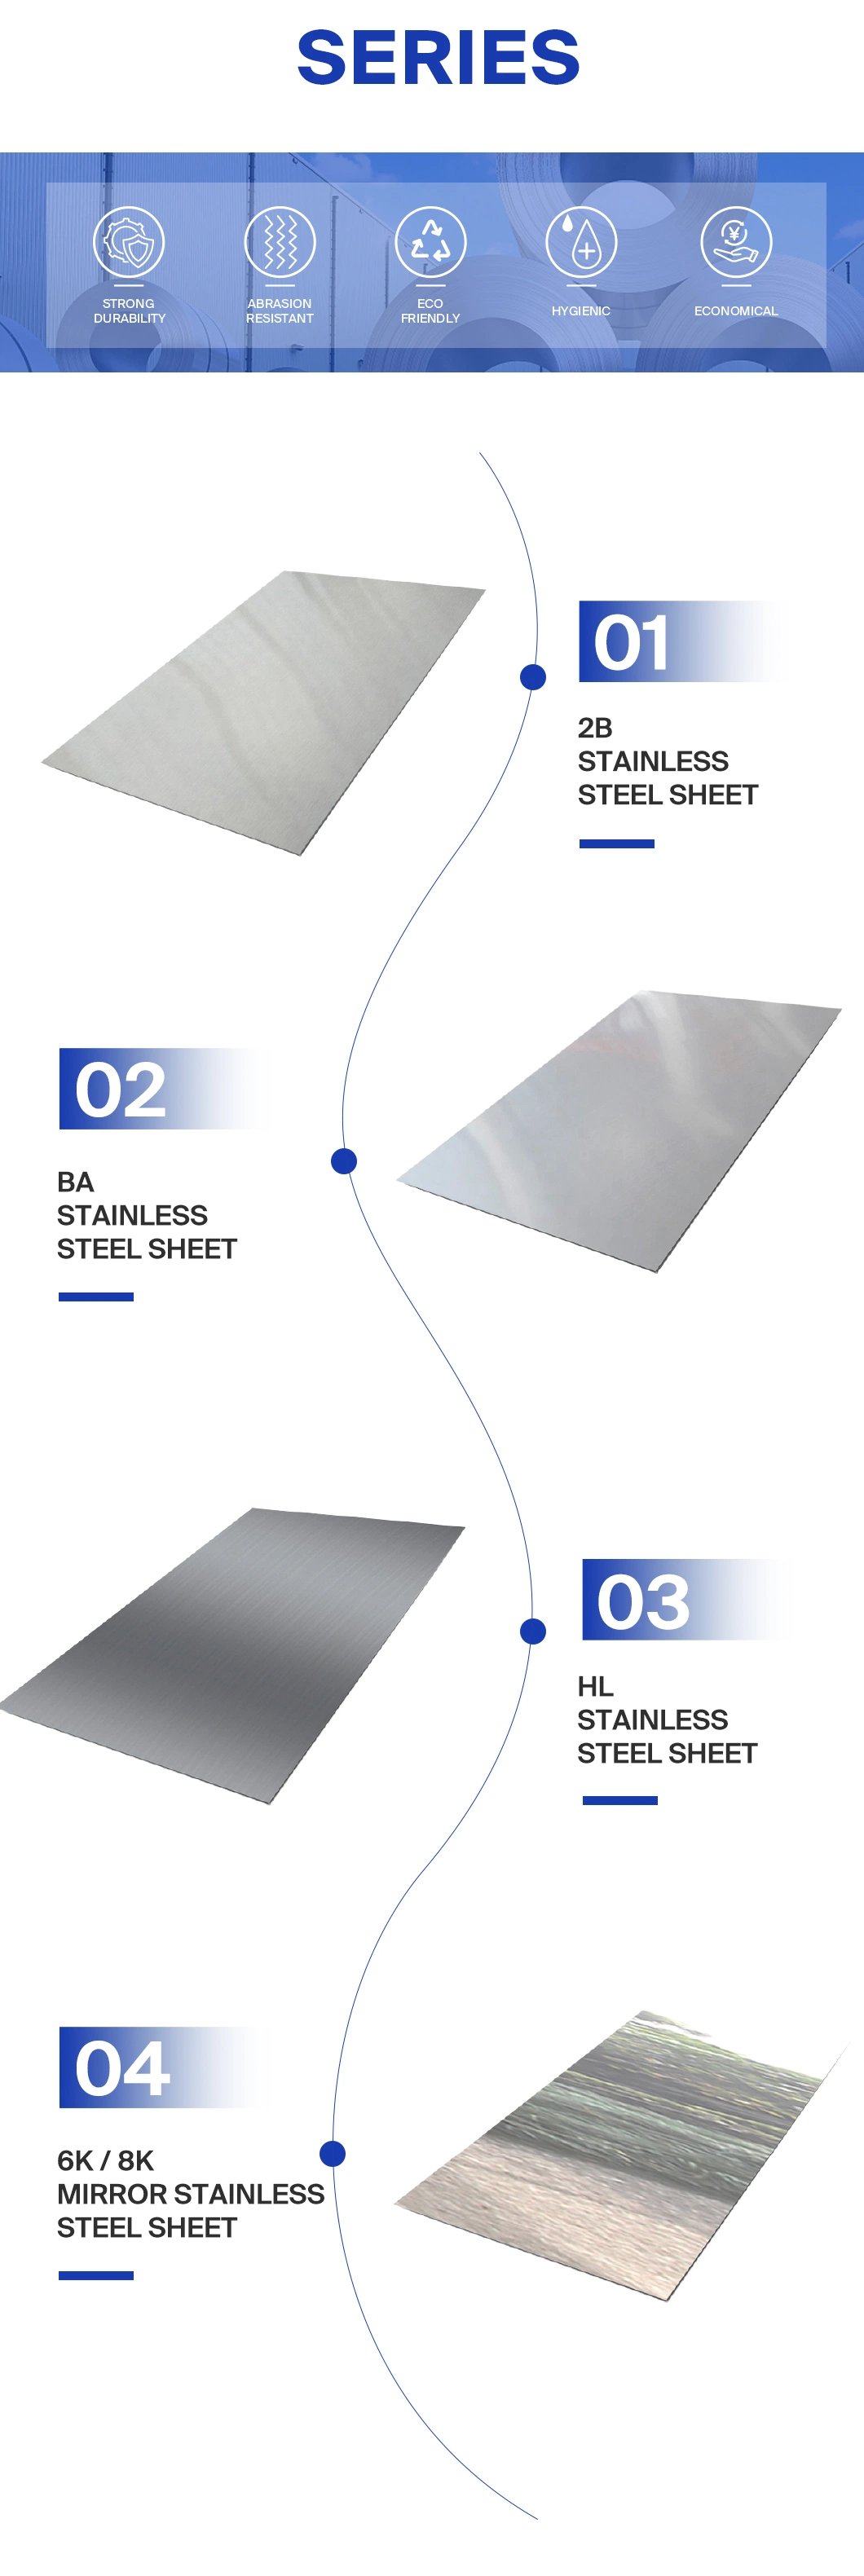 AISI SUS 2b Ss Roll Stainless Steel Coil Grade 201 Mirror Hl No. 4 430 410 316 304 Cold Rolled Steel Strip Sheet